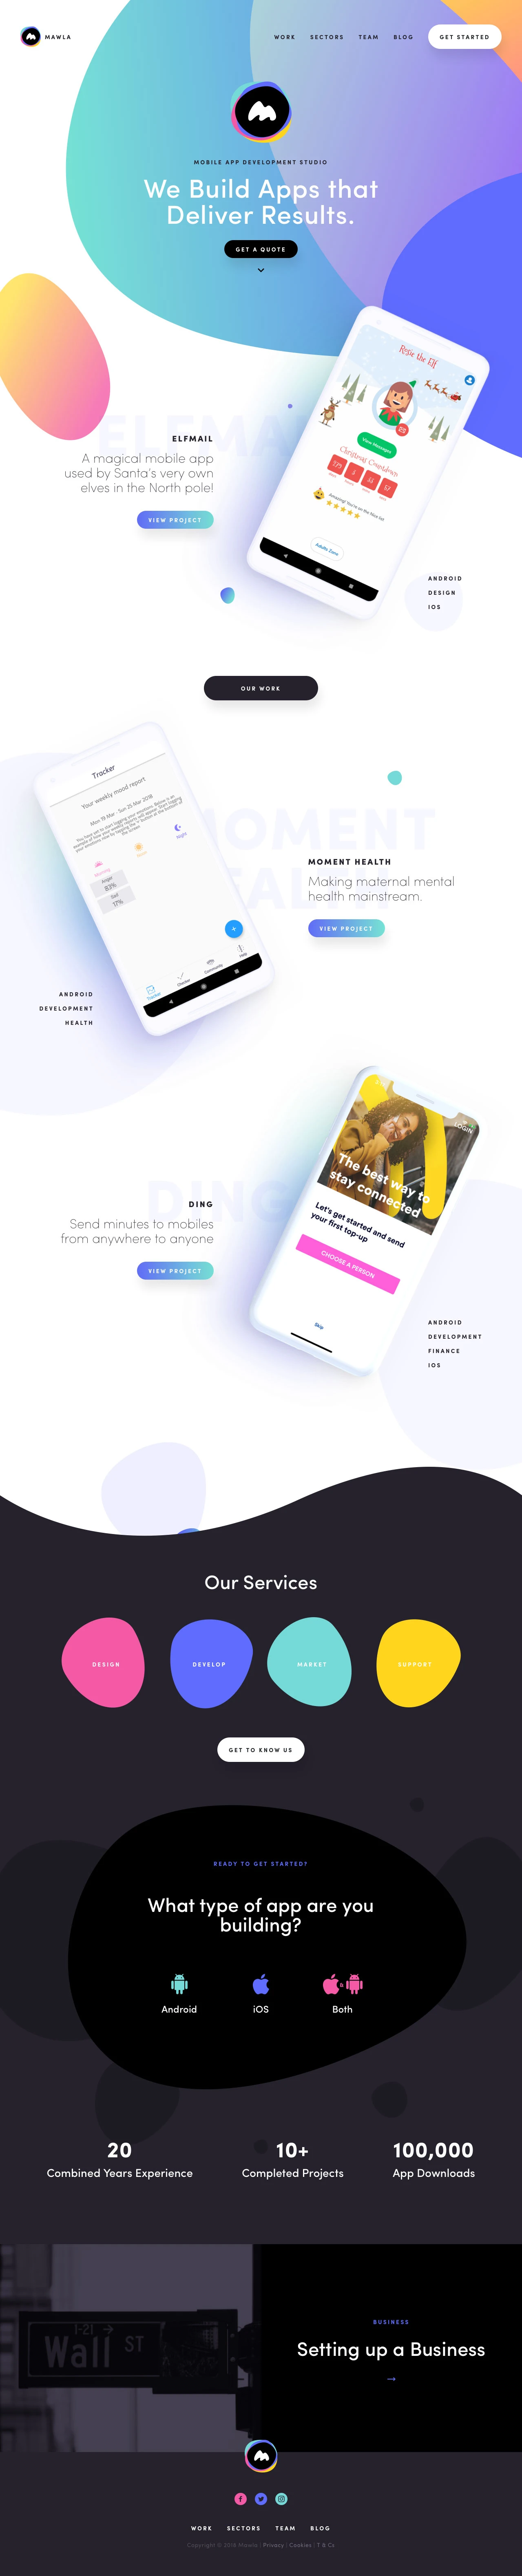 Mawla Landing Page Example: Hi, we're Mawla, a Mobile App Development Studio, based in Dublin Ireland. We're a team that cares about making great products. We specialise in Android and iOS Mobile App Development.